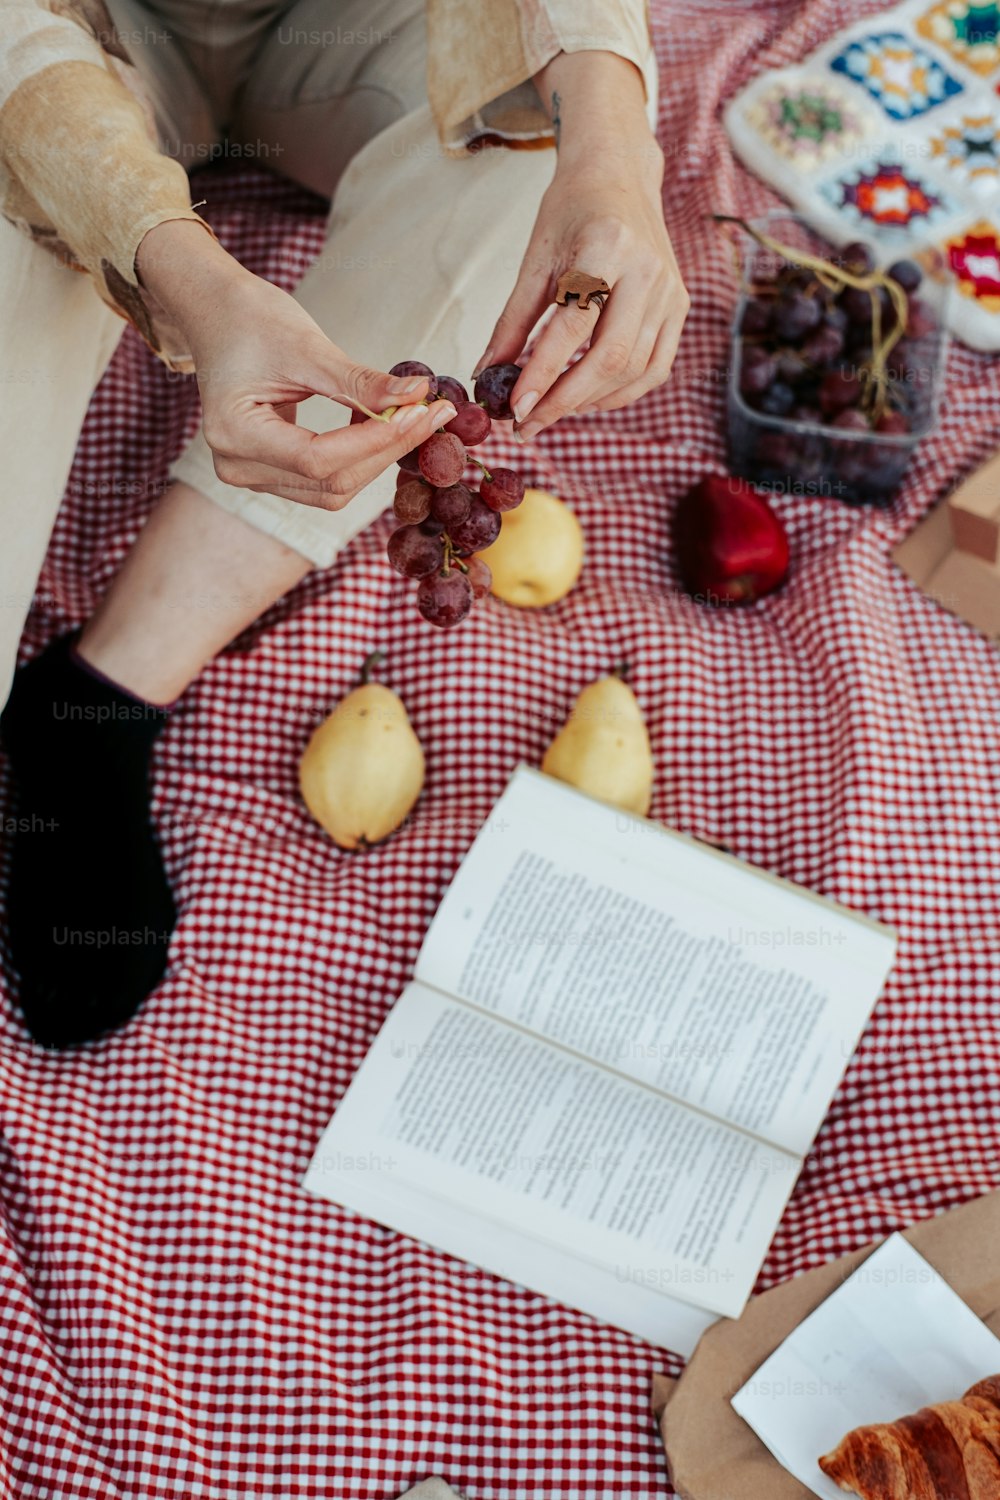 a person sitting on a blanket with a book and some fruit